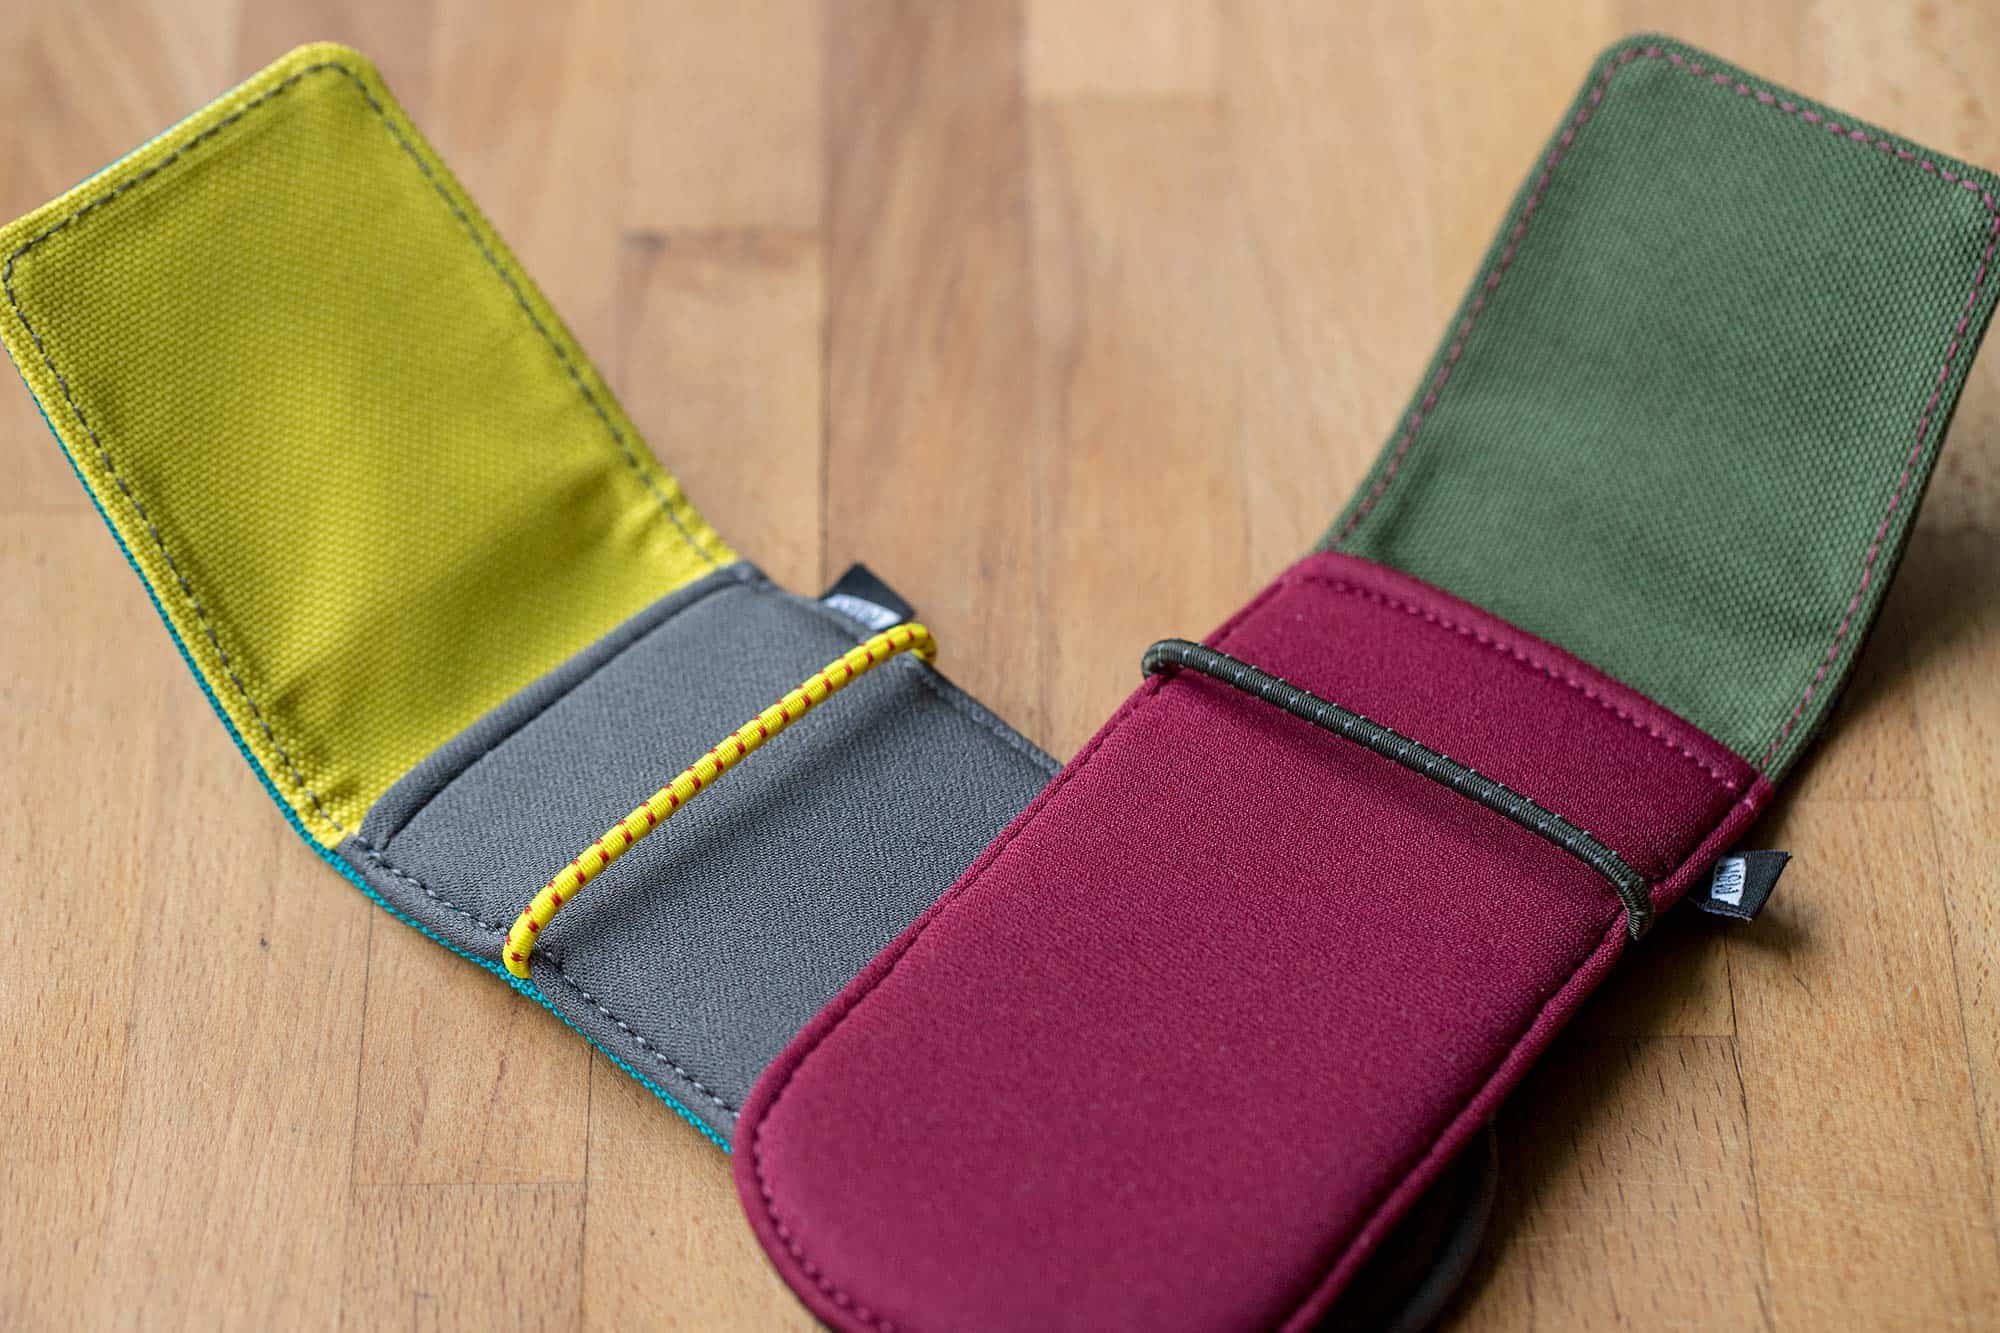 Introducing the EDC Watch Pouch by Worn & Wound - Worn & Wound